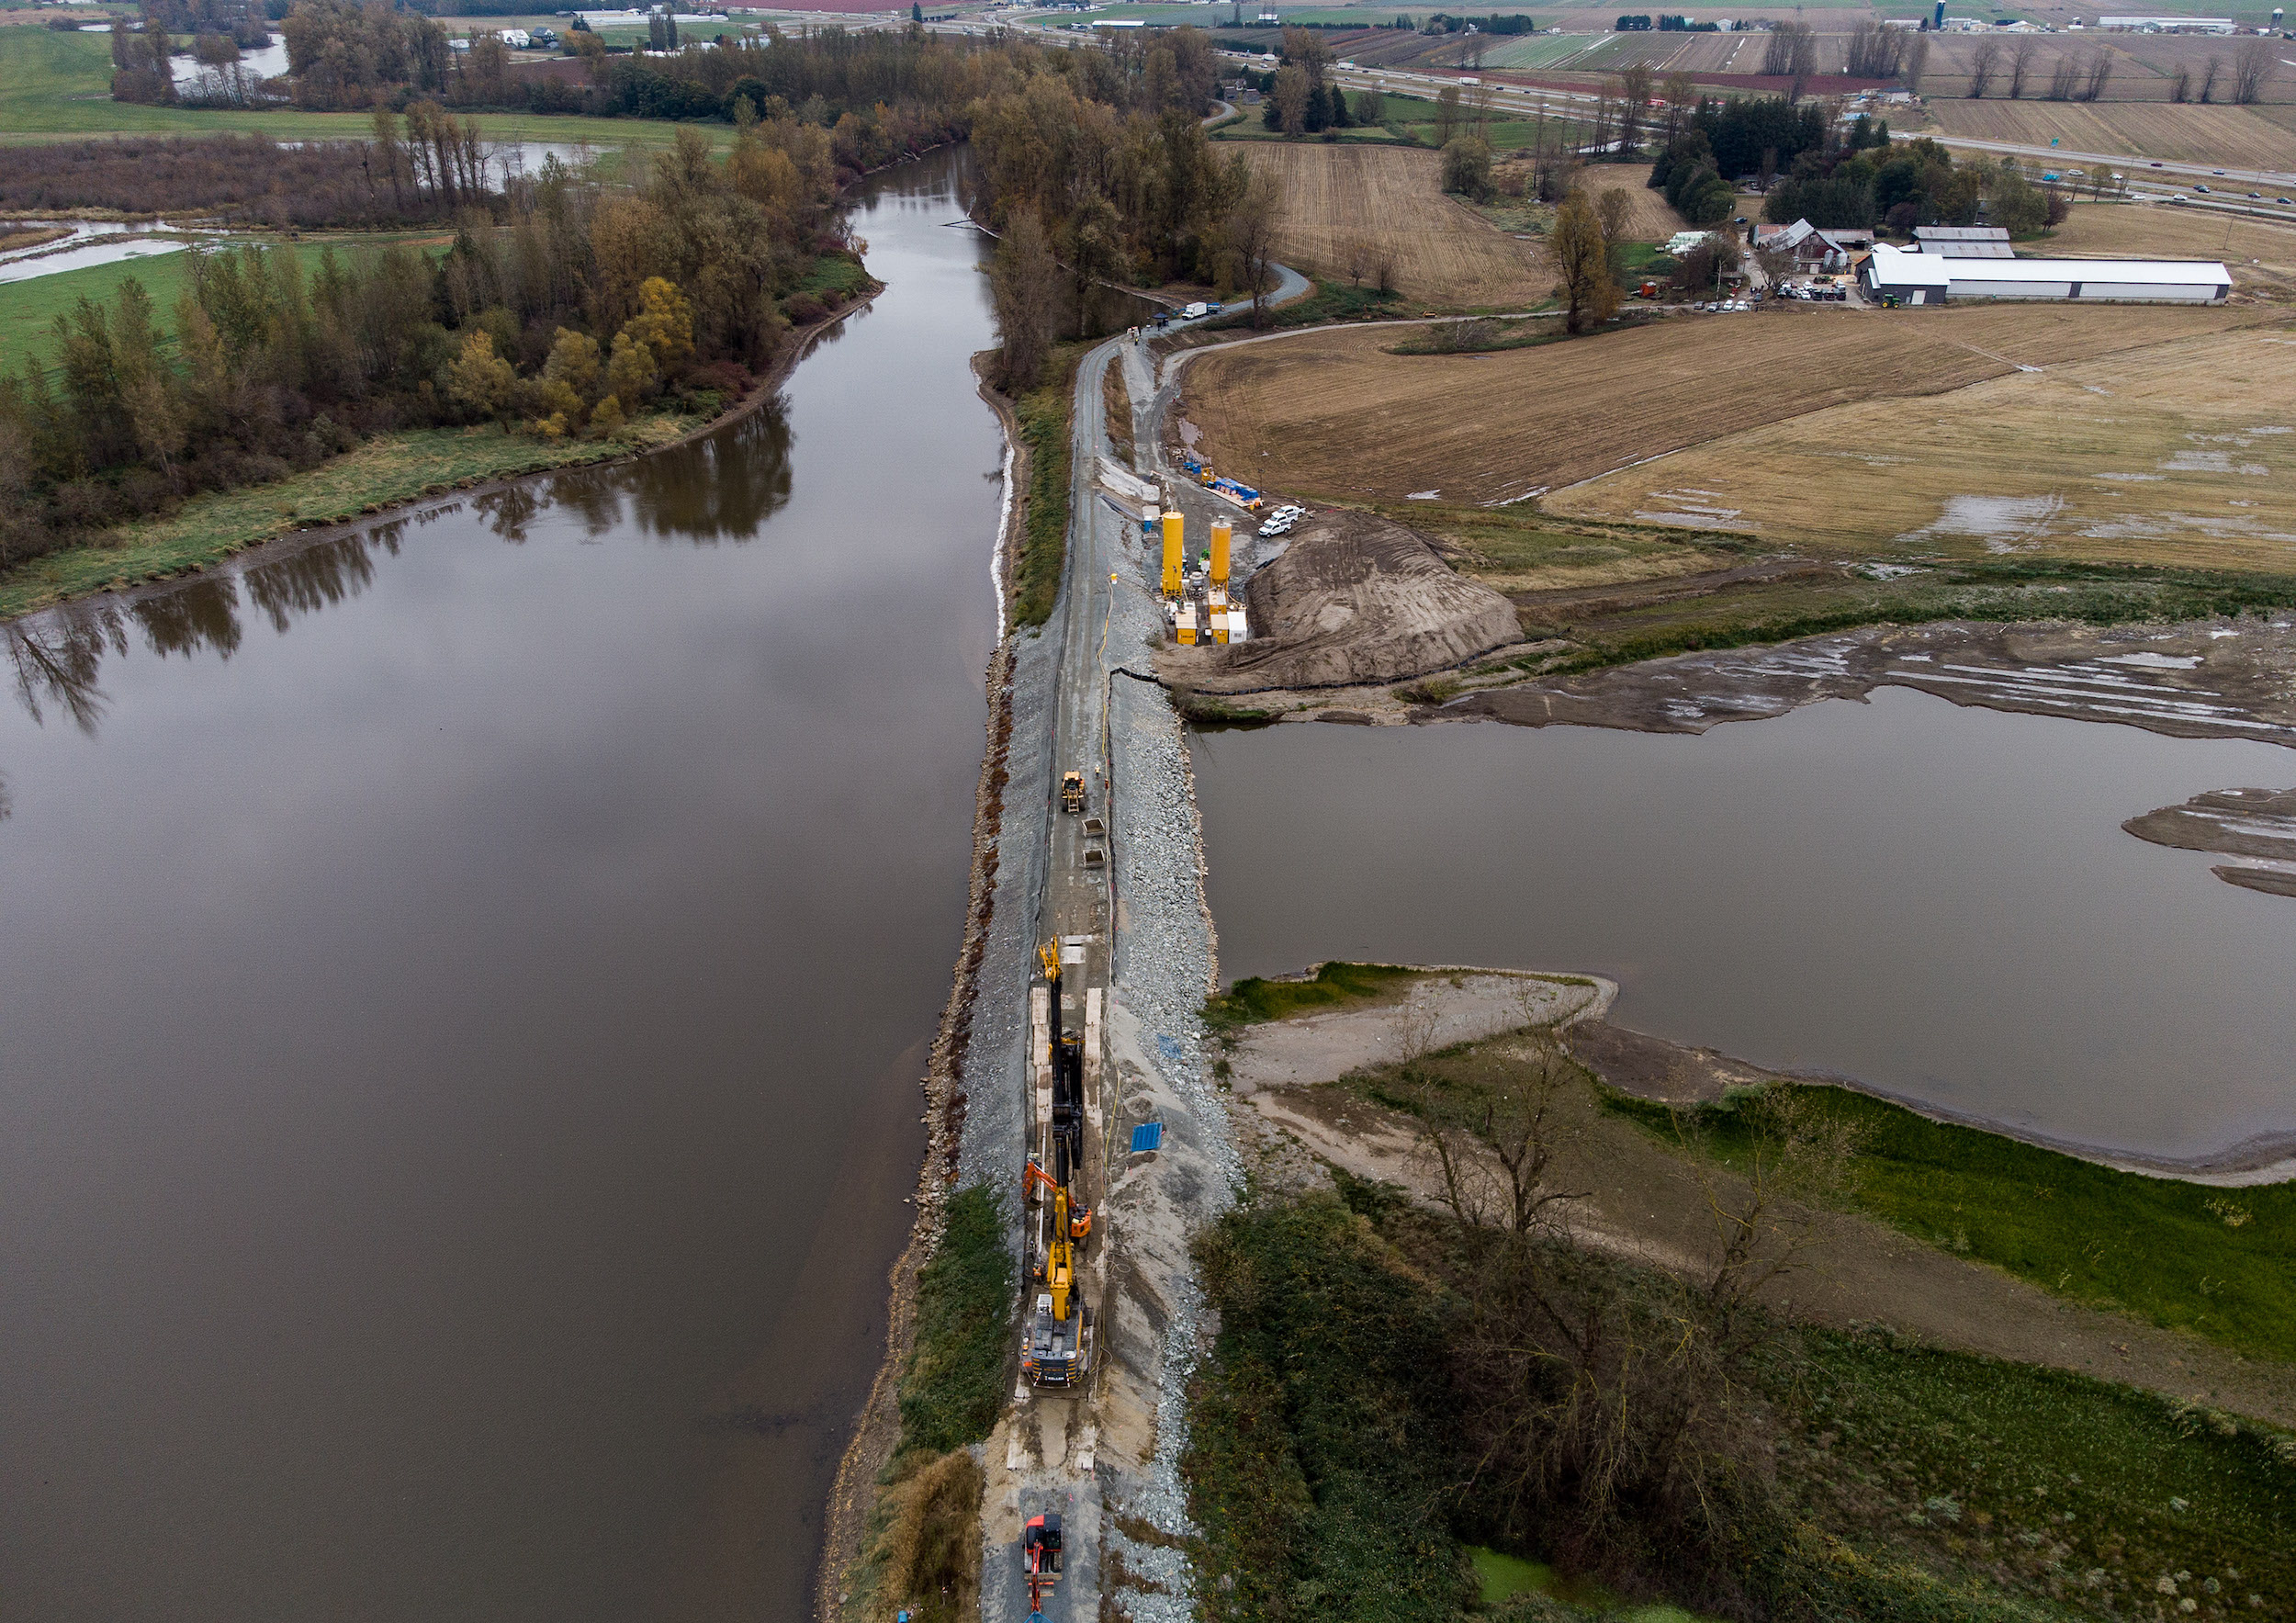 For years, politicians, residents and researchers had said that many B.C. municipalities didn't have the resources to properly maintain their dikes. Their calls for help went unheeded and in November 2021, the Sumas dike in Abbotsford failed, resulting in floods and landslides that killed five people.